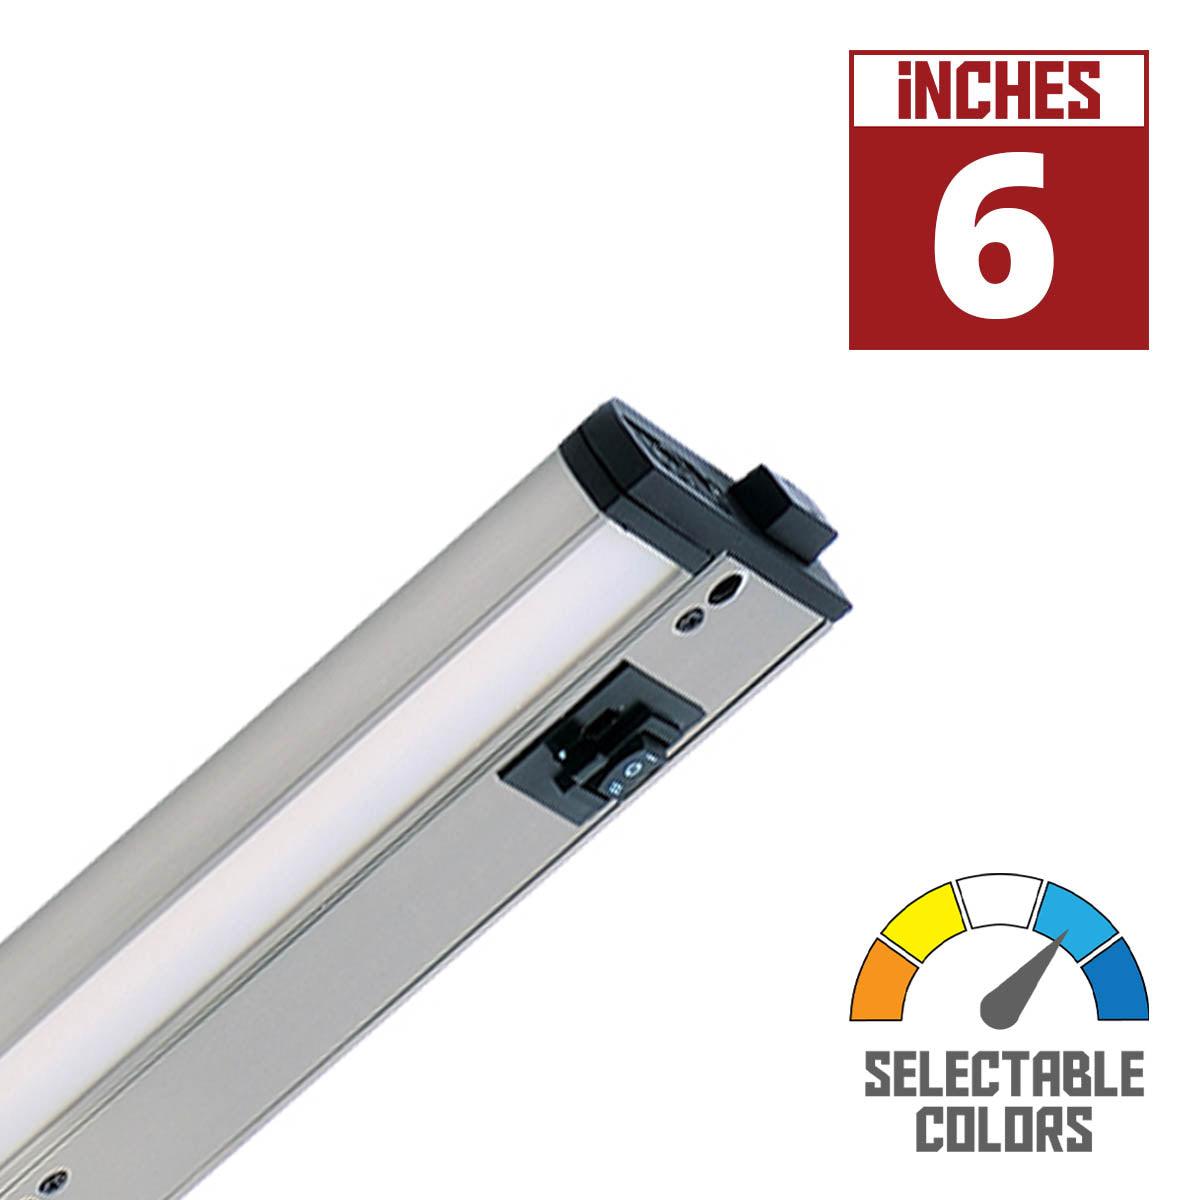 CounterMax 5K 6 Inch Under Cabinet LED Light with Patent gimbals, 360 Lumens, Linkable, CCT Selectable 2700K to 5000K, 120V - Bees Lighting